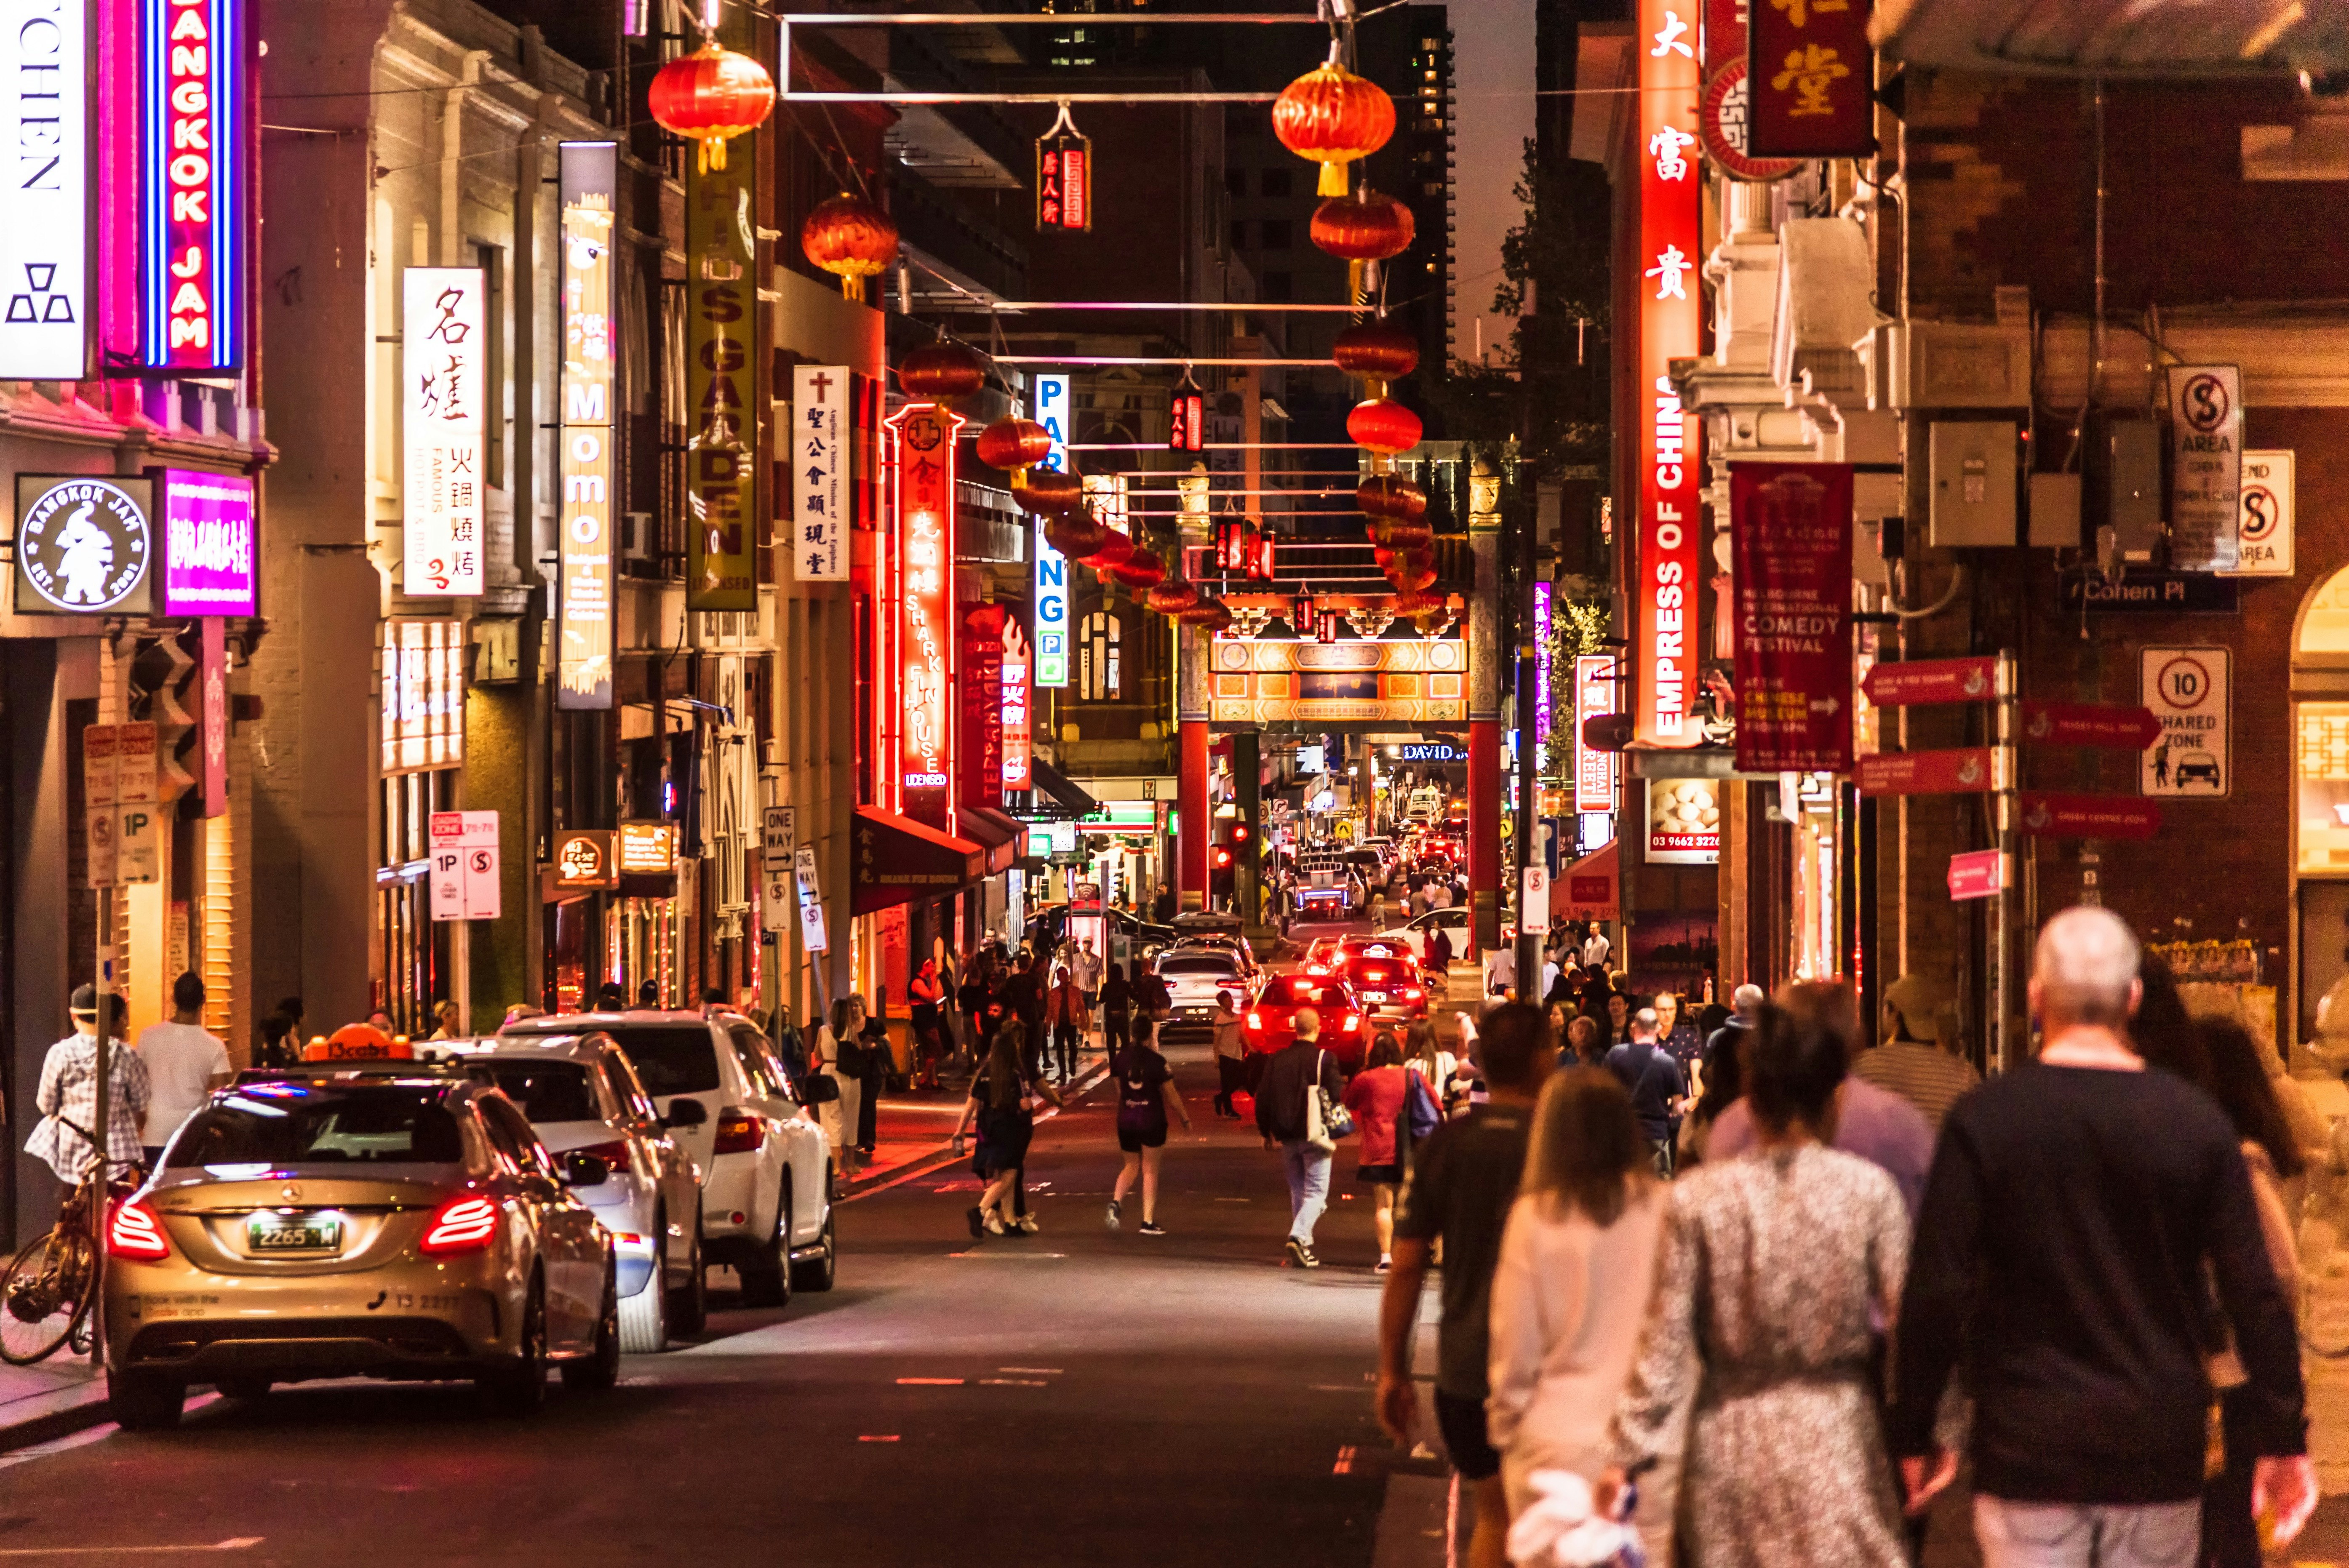 An evening view of people walking through the streets of Chinatown in Melbourne. Red lanterns dangle from buildings and arches above the street.